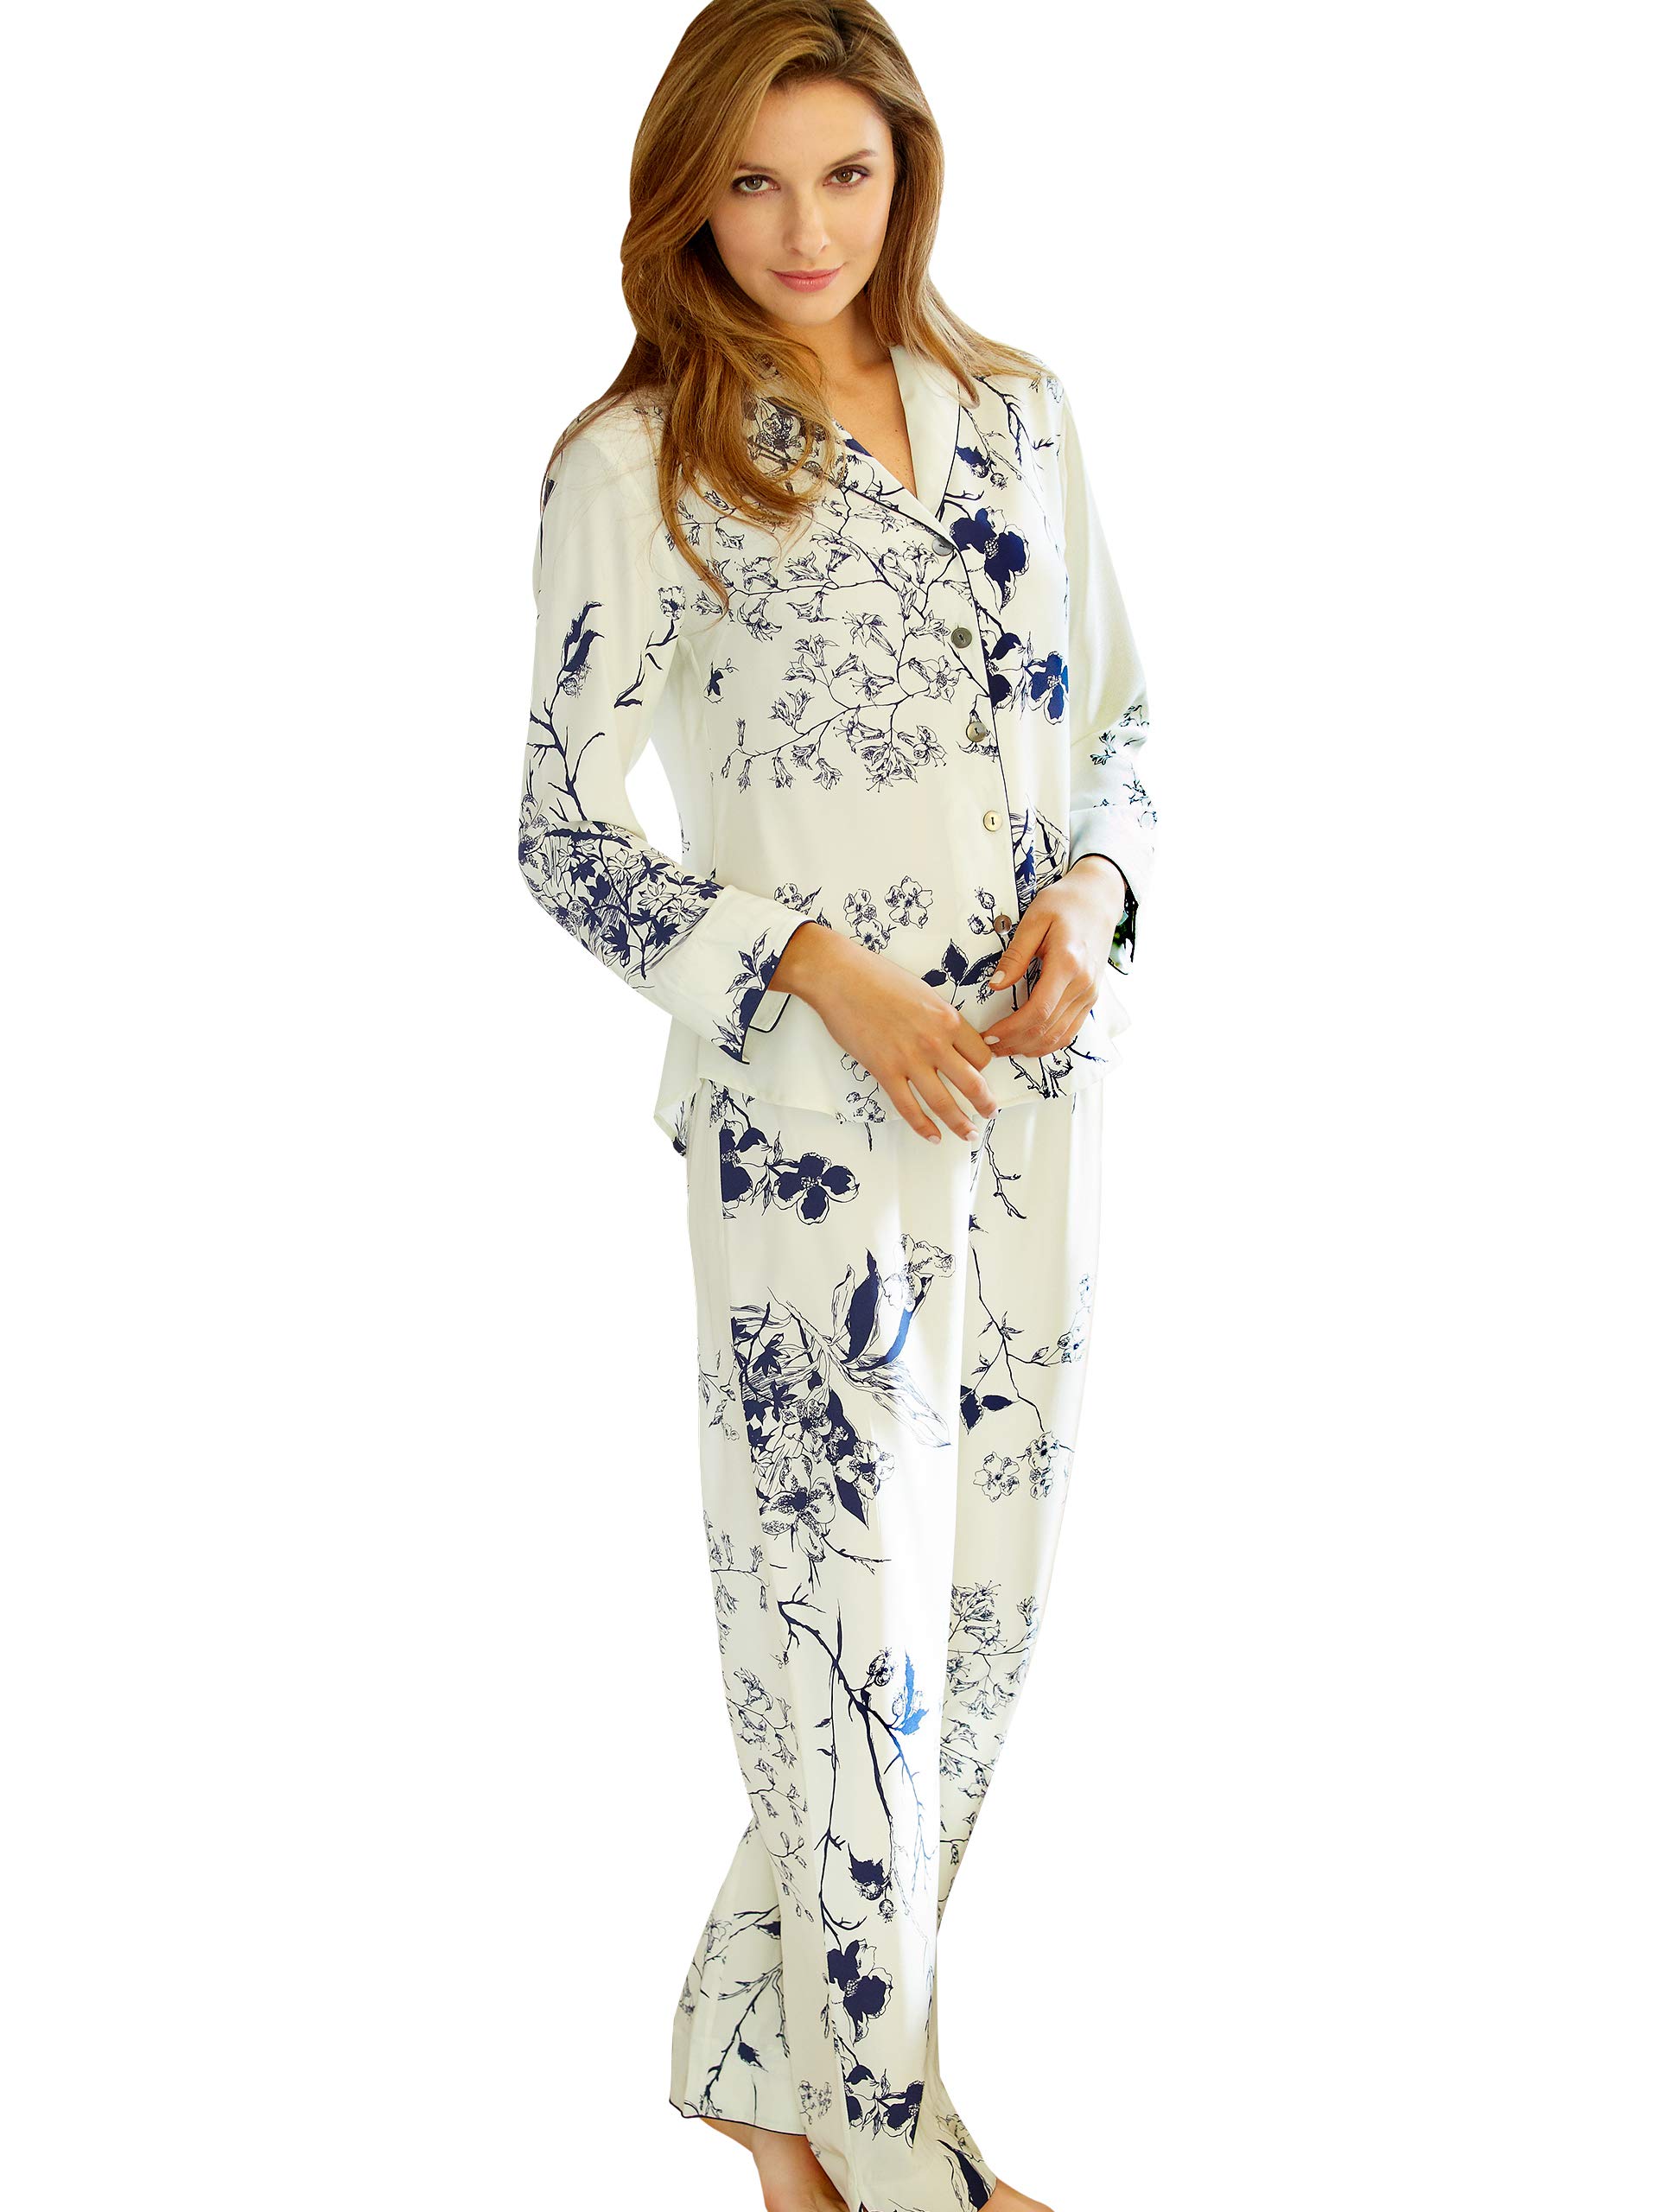 Julianna Rae Women's 100% Mulberry Silk Pajama Set, Relaxed Fit PJs, Natalya Collection